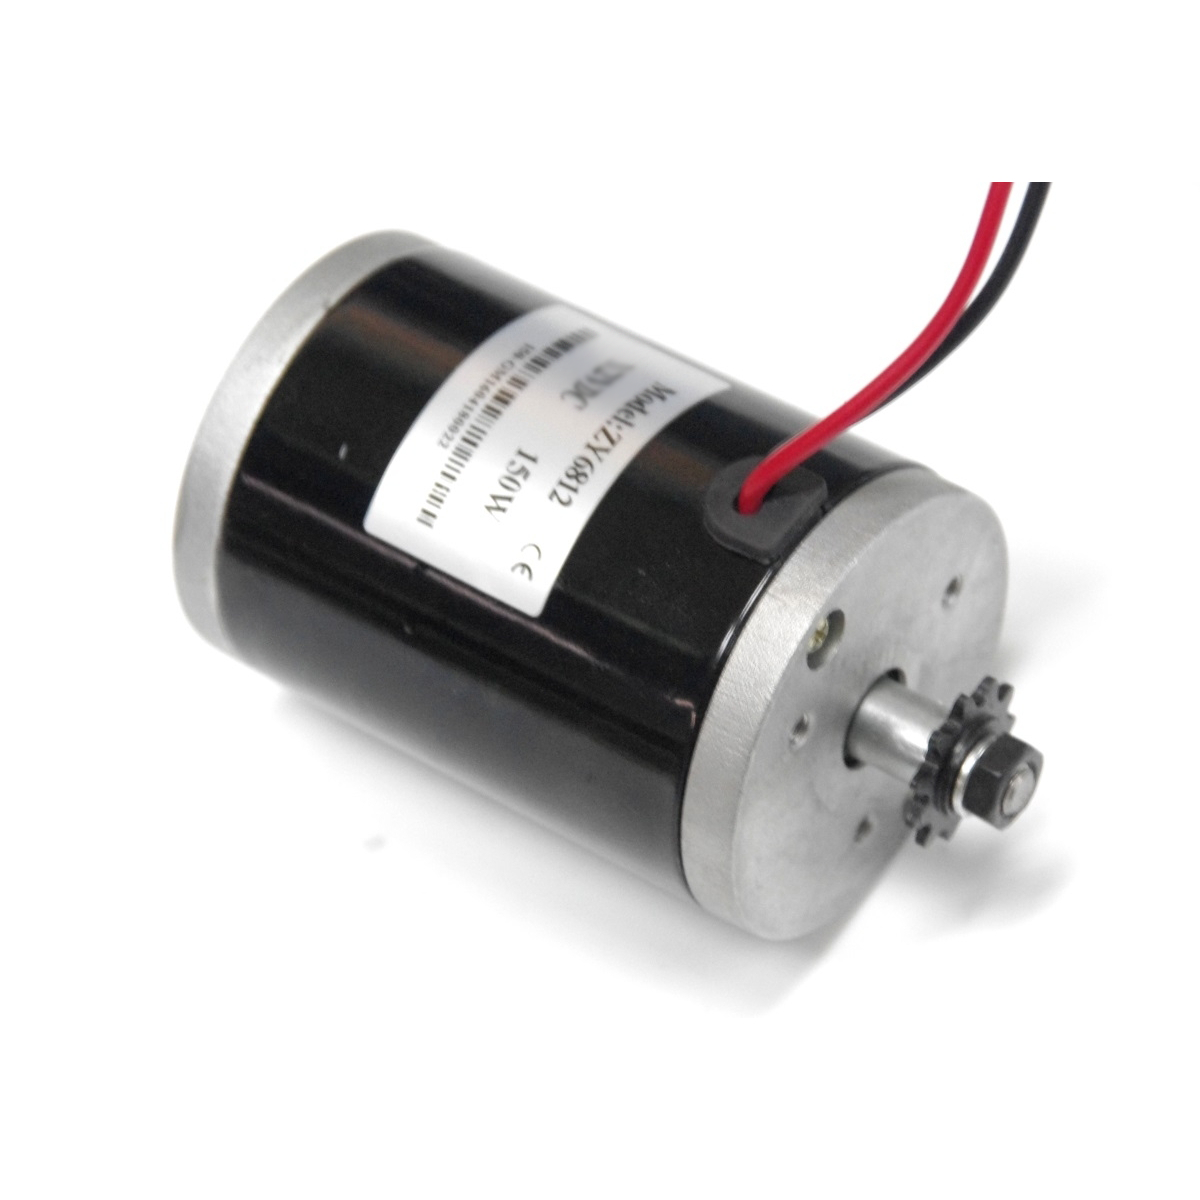 https://robu.in/wp-content/uploads/2019/09/MY6812-150W-24V-2750RPM-DC-Motor-for-E-bike-Bicycle-ROBU.png